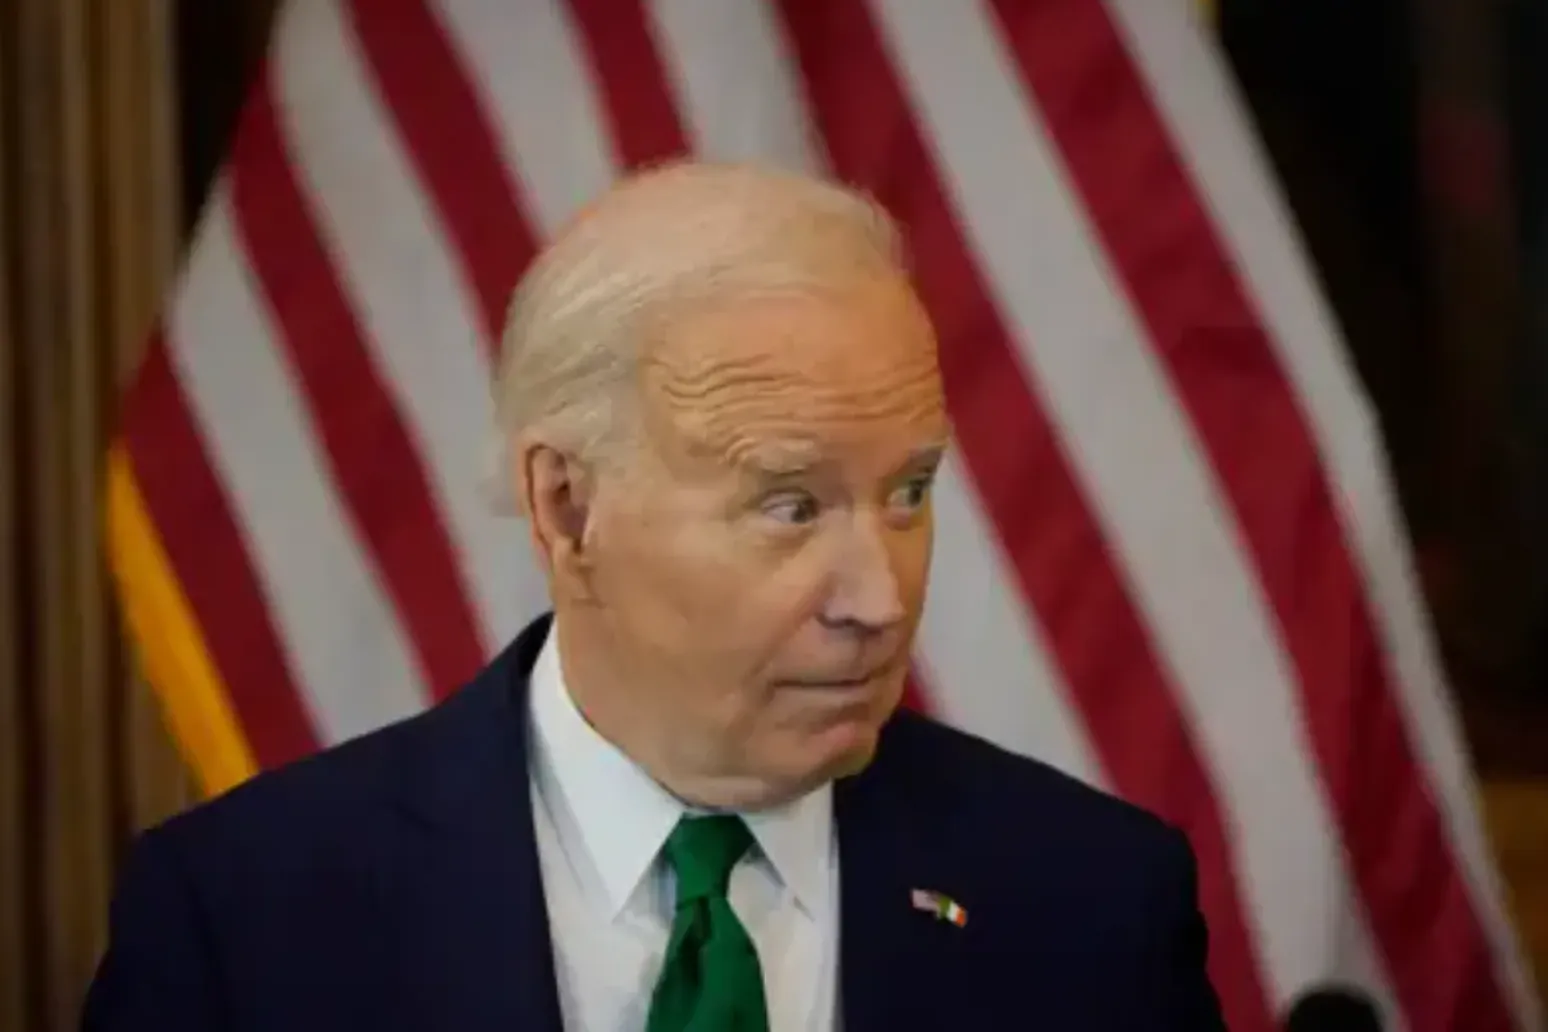 Joe Biden tells Israel to protect aid workers and reach Gaza ceasefire 